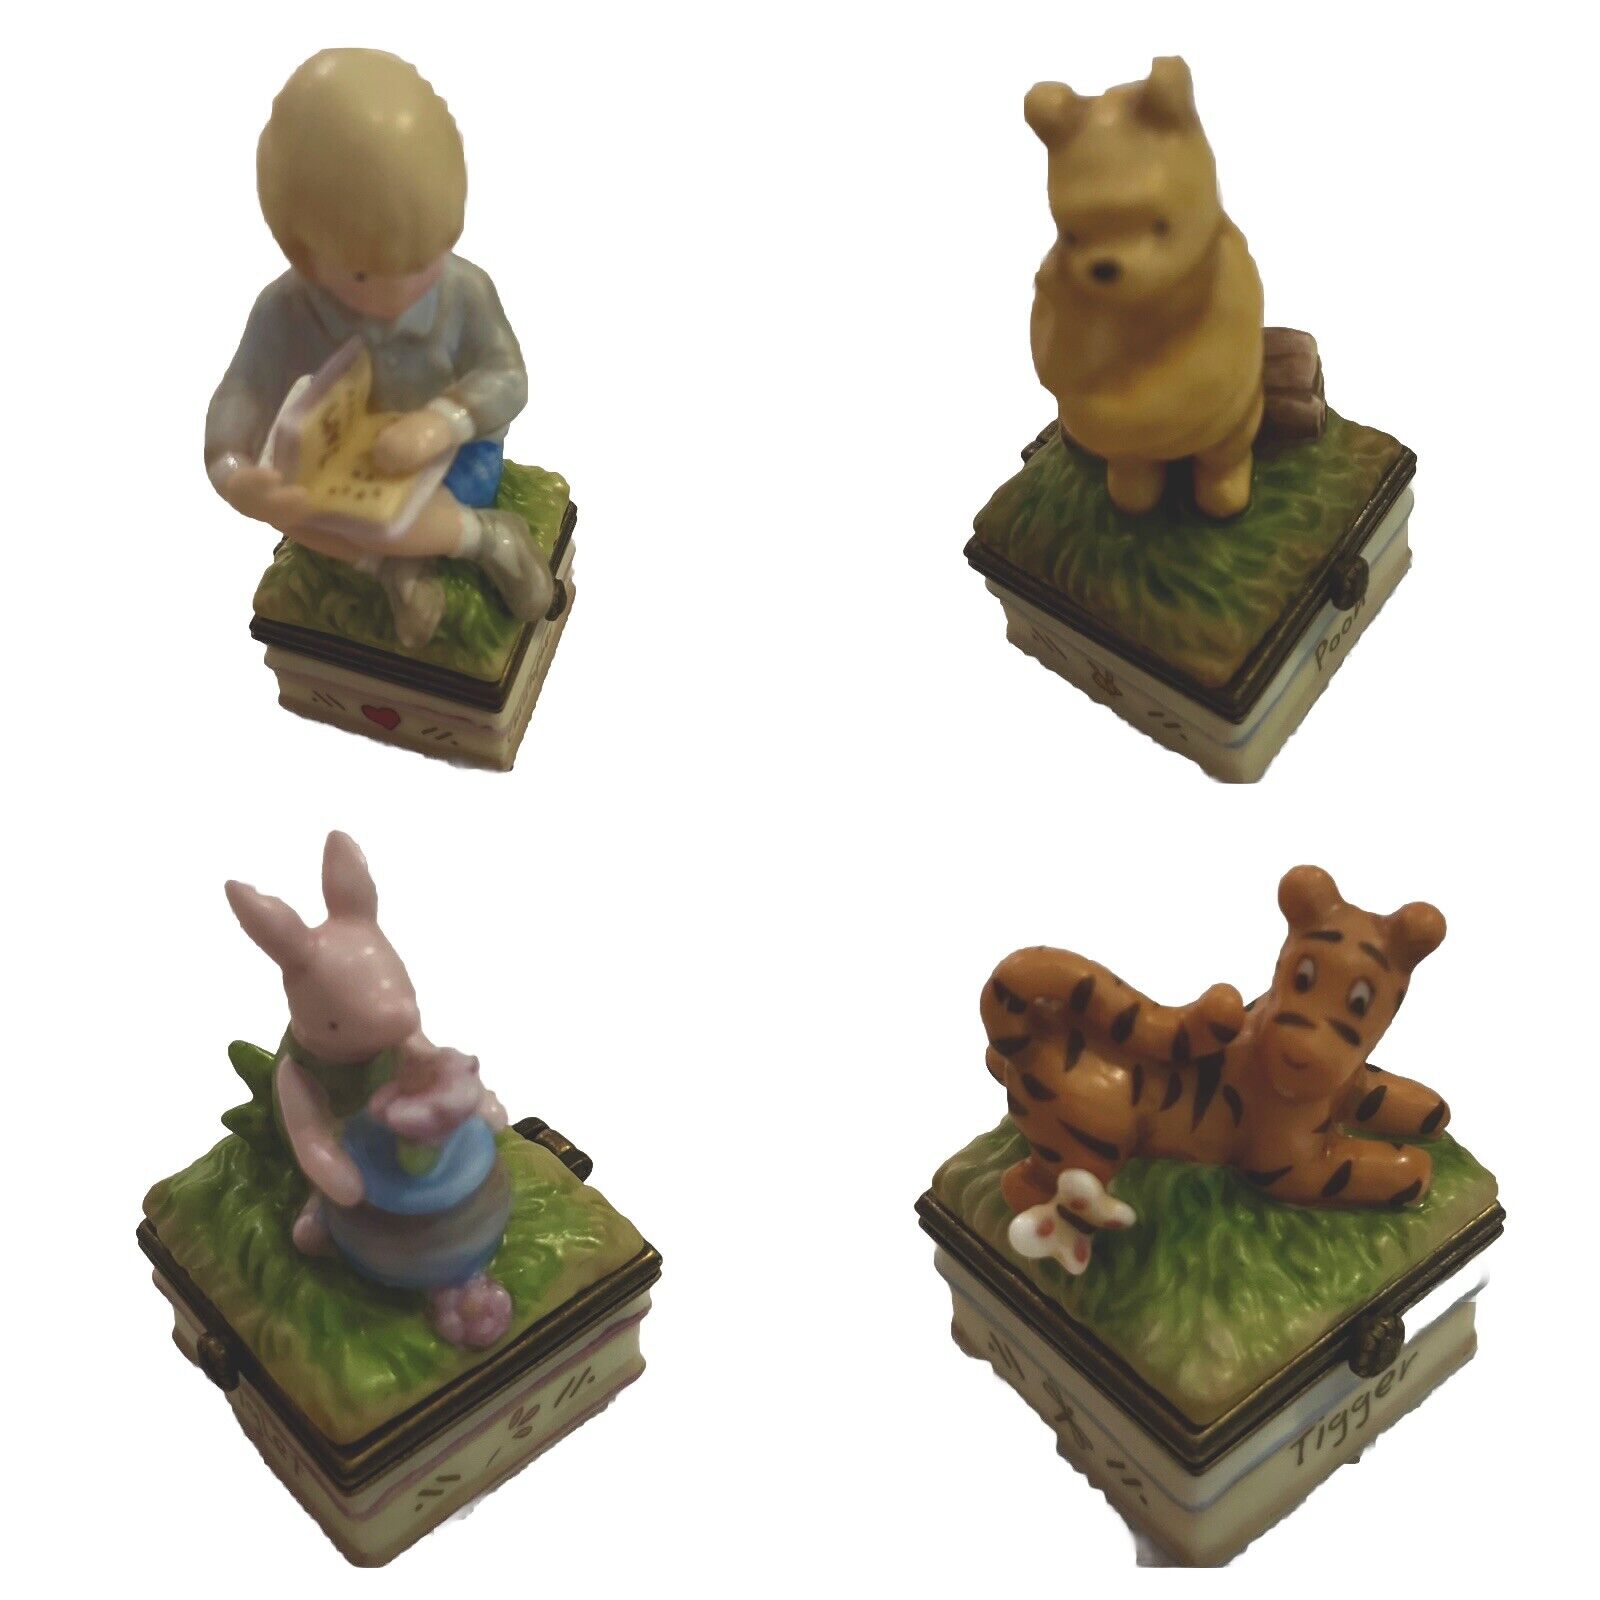 4 RARE Winnie The Pooh Trinket Boxes In Mint Condition Quotes & Trinkets Inside